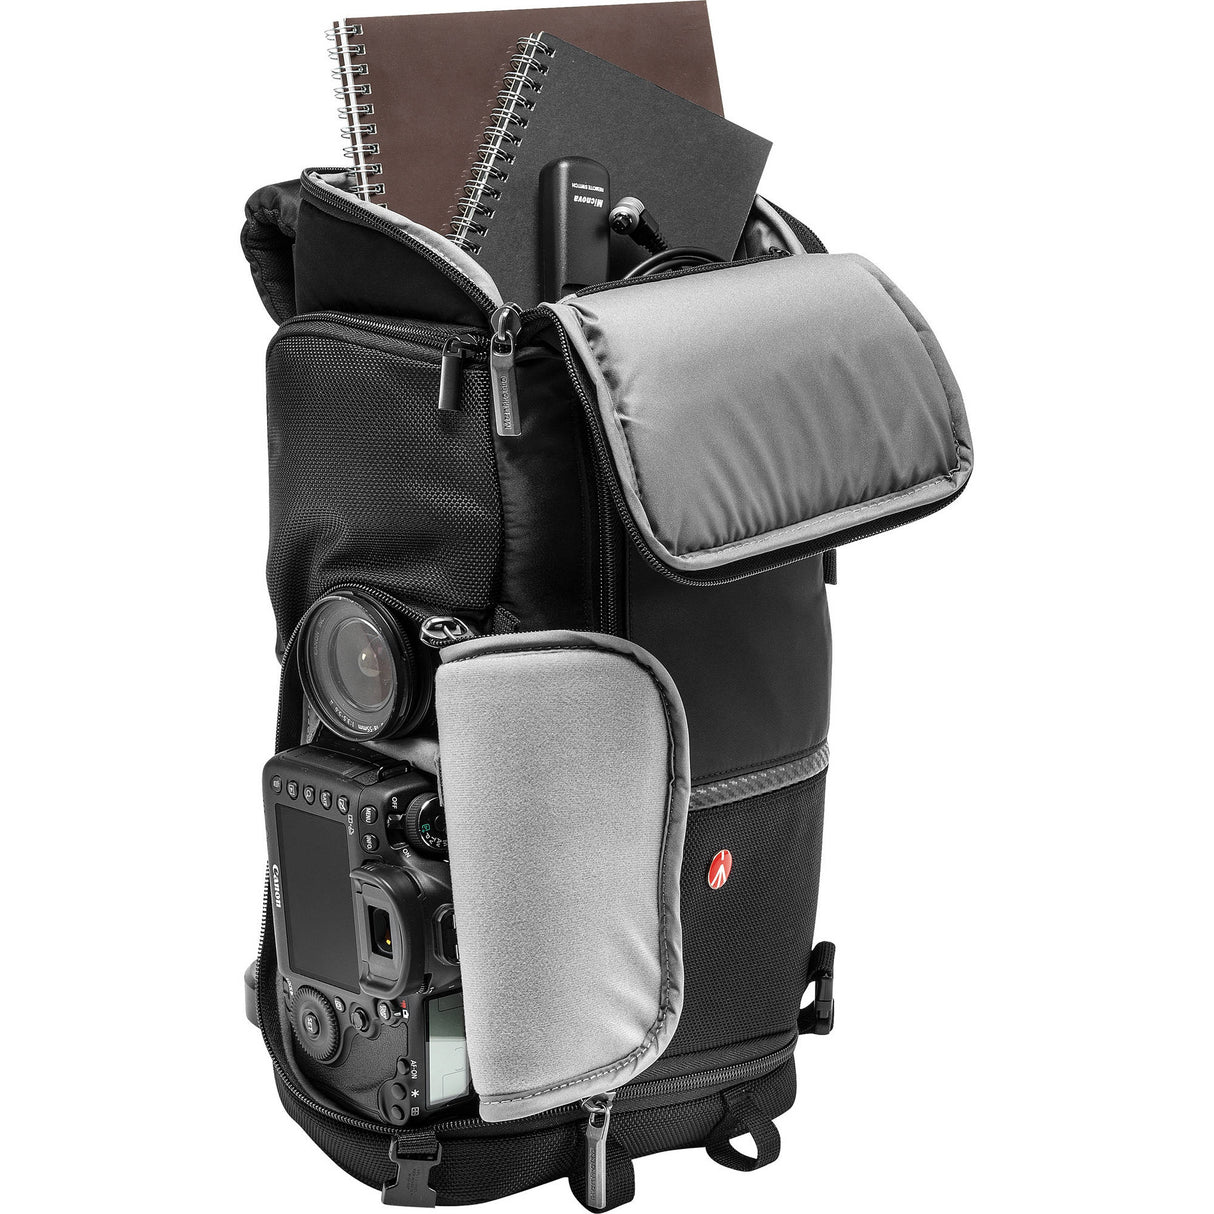 Manfrotto Advanced Tri Backpack S (Small)